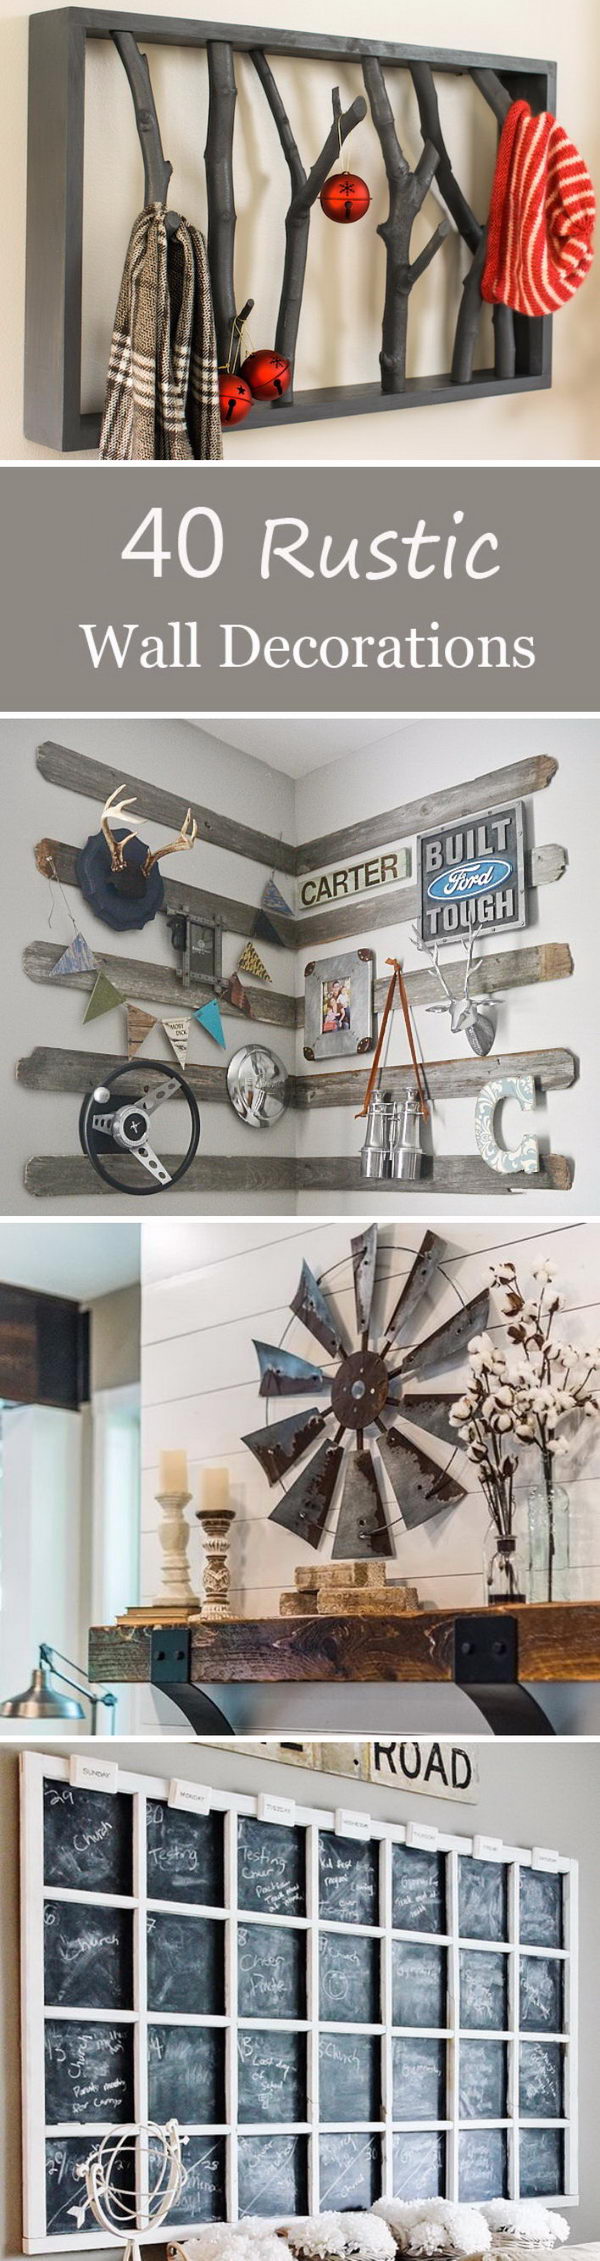 Rustic Wall Decorations For Adding Warmth To Your Home. 